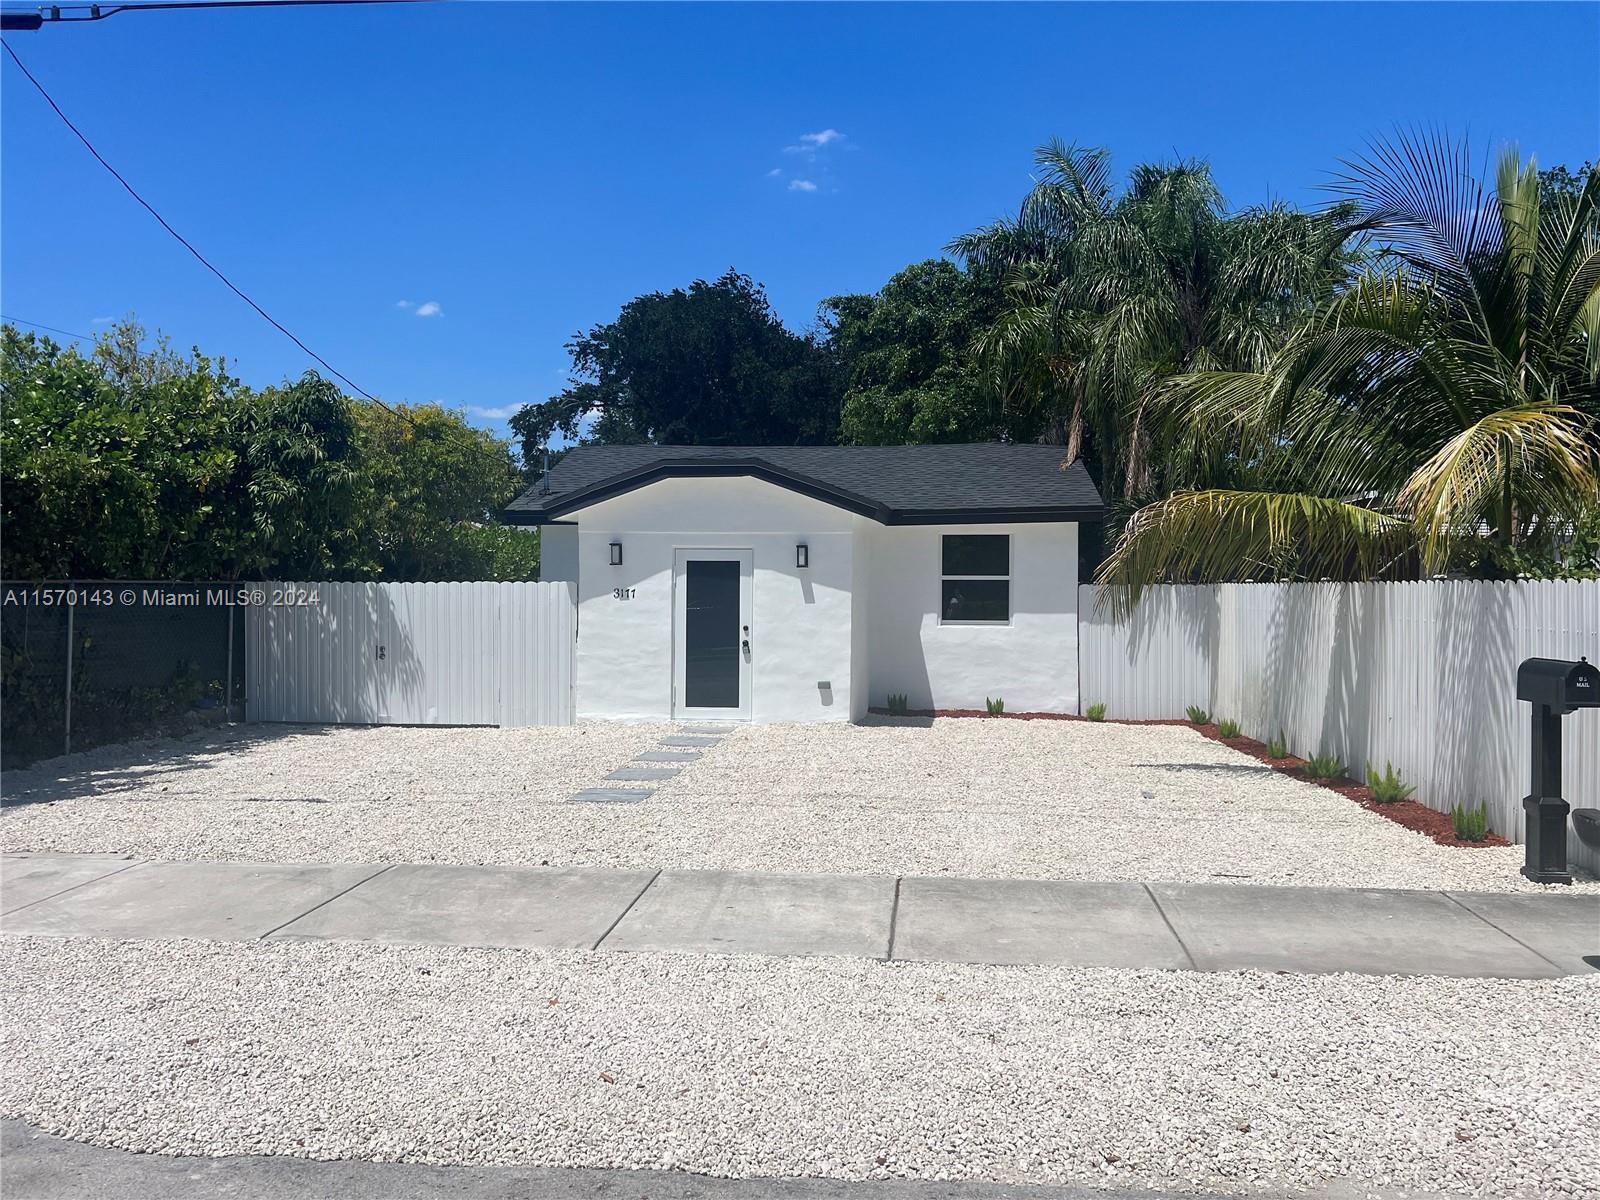 Photo of 3177 NW 42nd St in Miami, FL